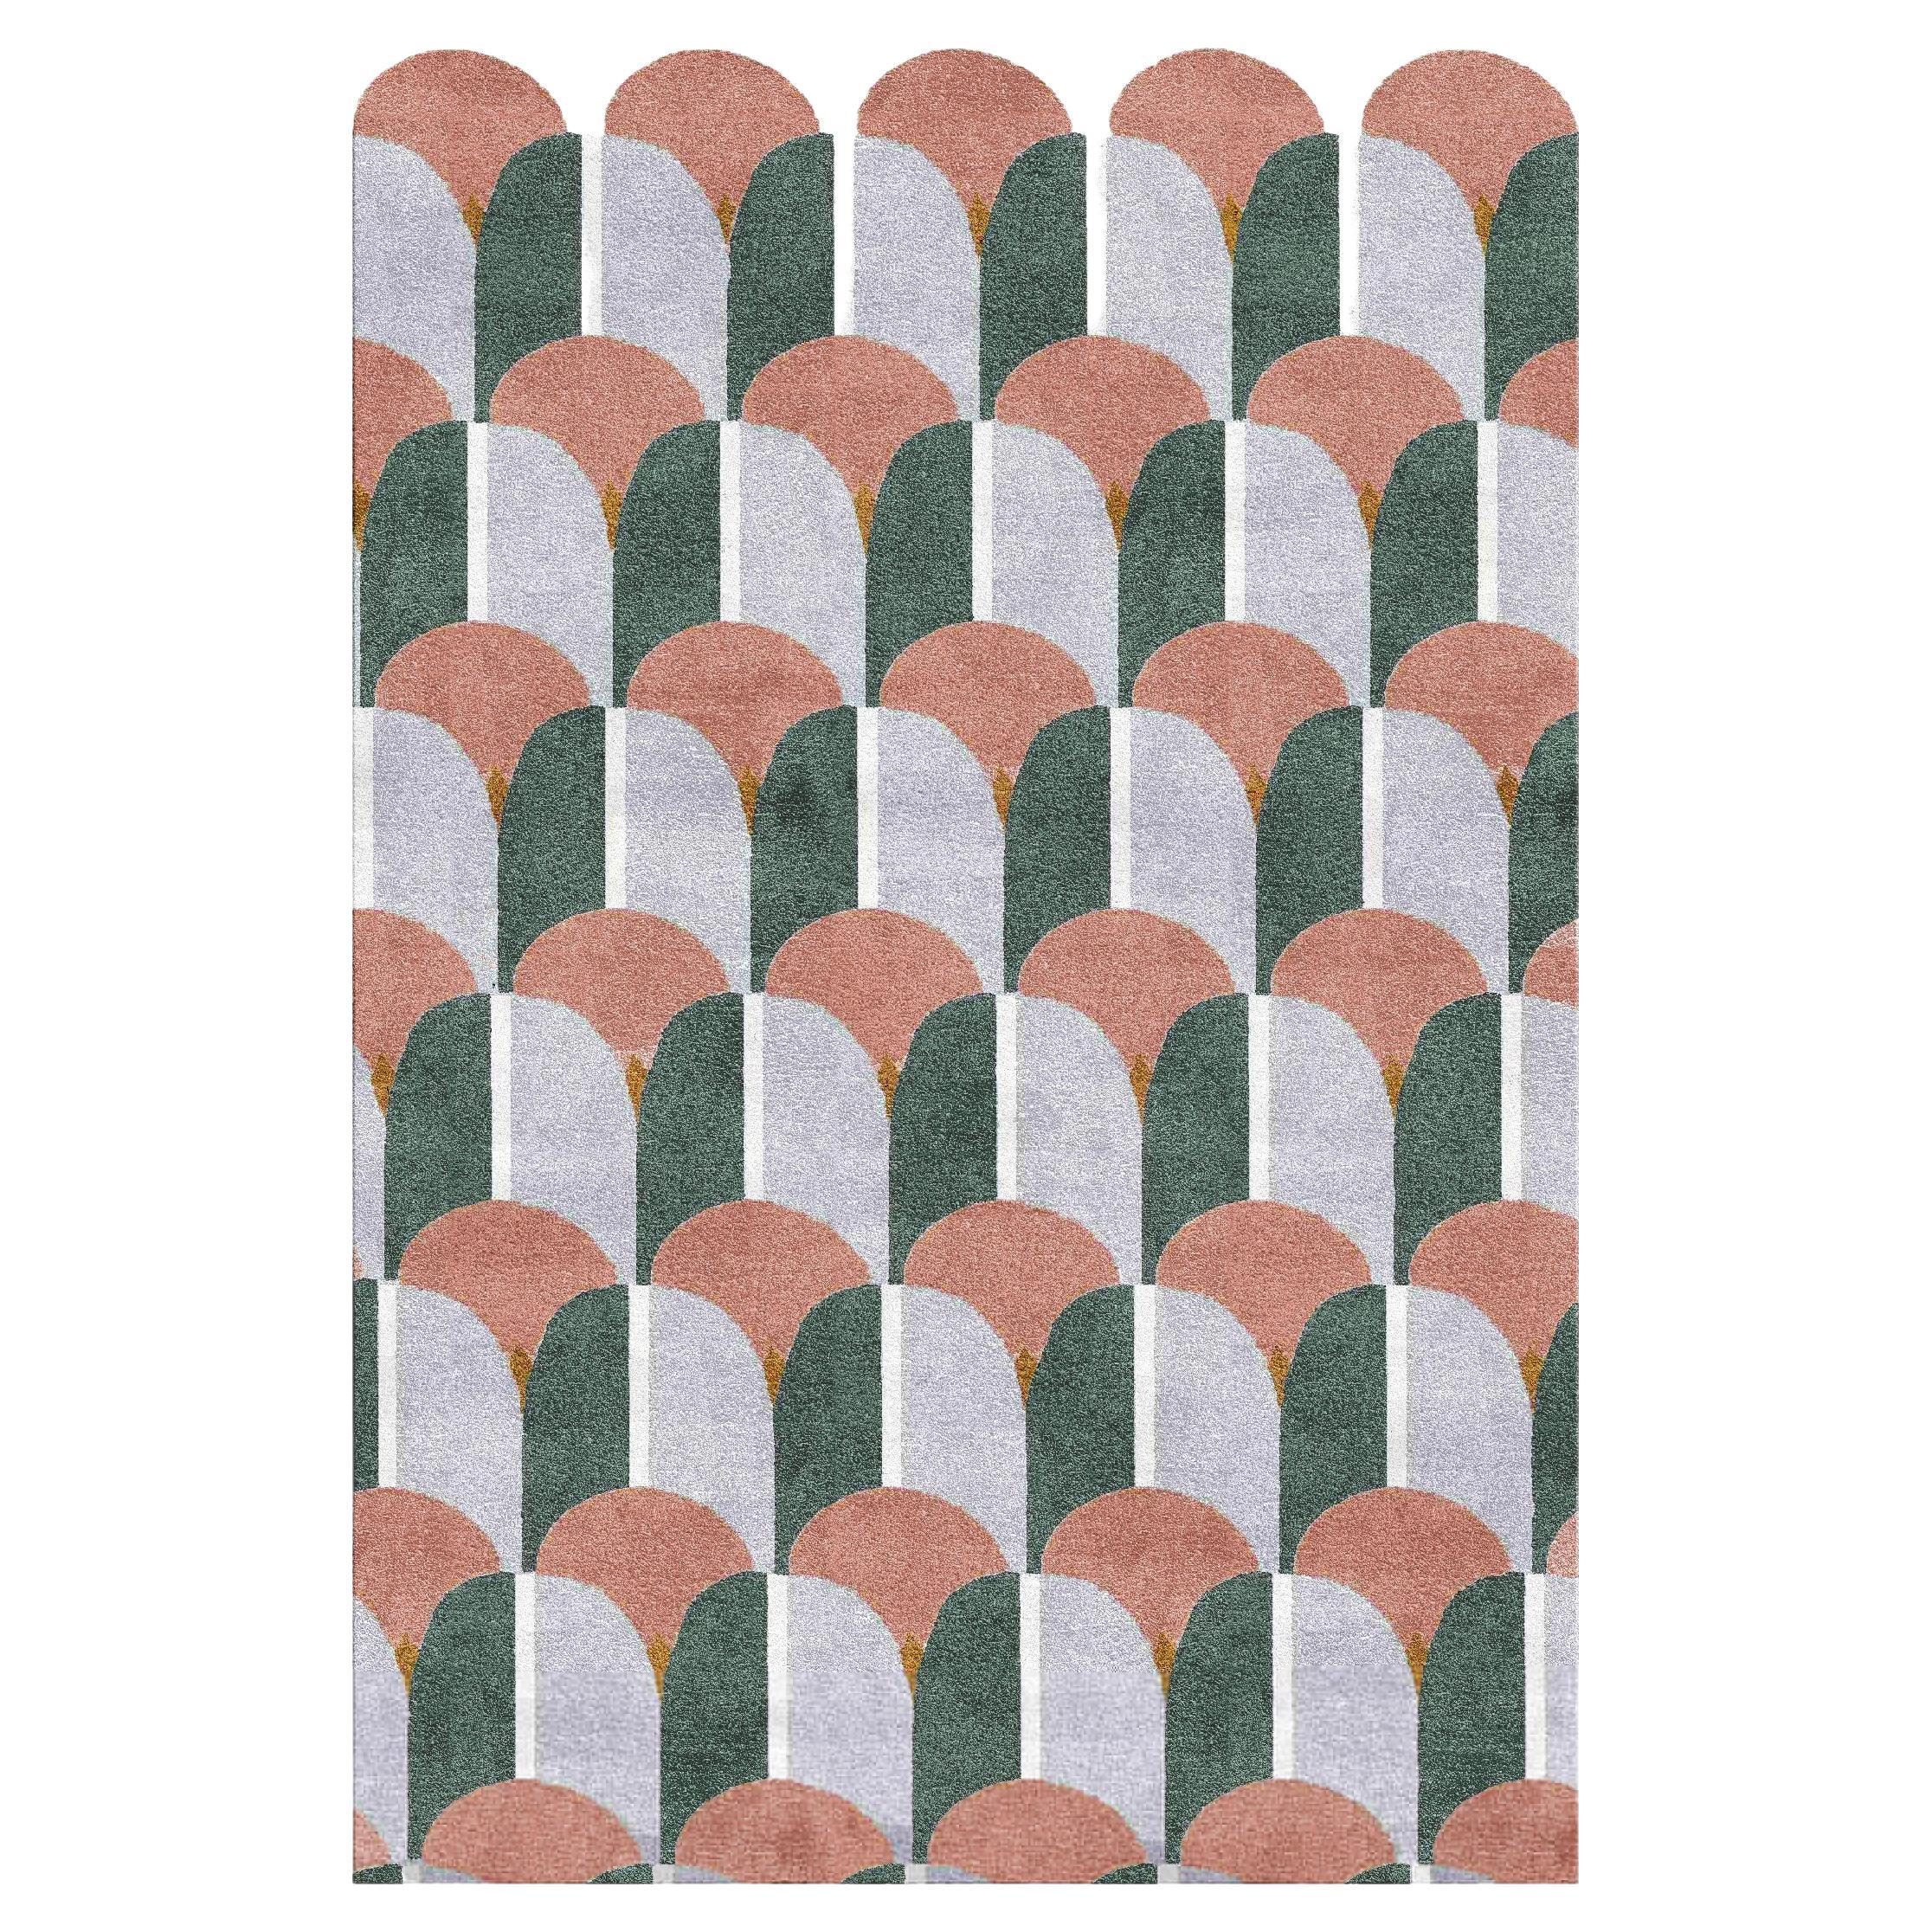 Rinascimento Hand-Tufted Green Rug by Sarah Balivo For Sale